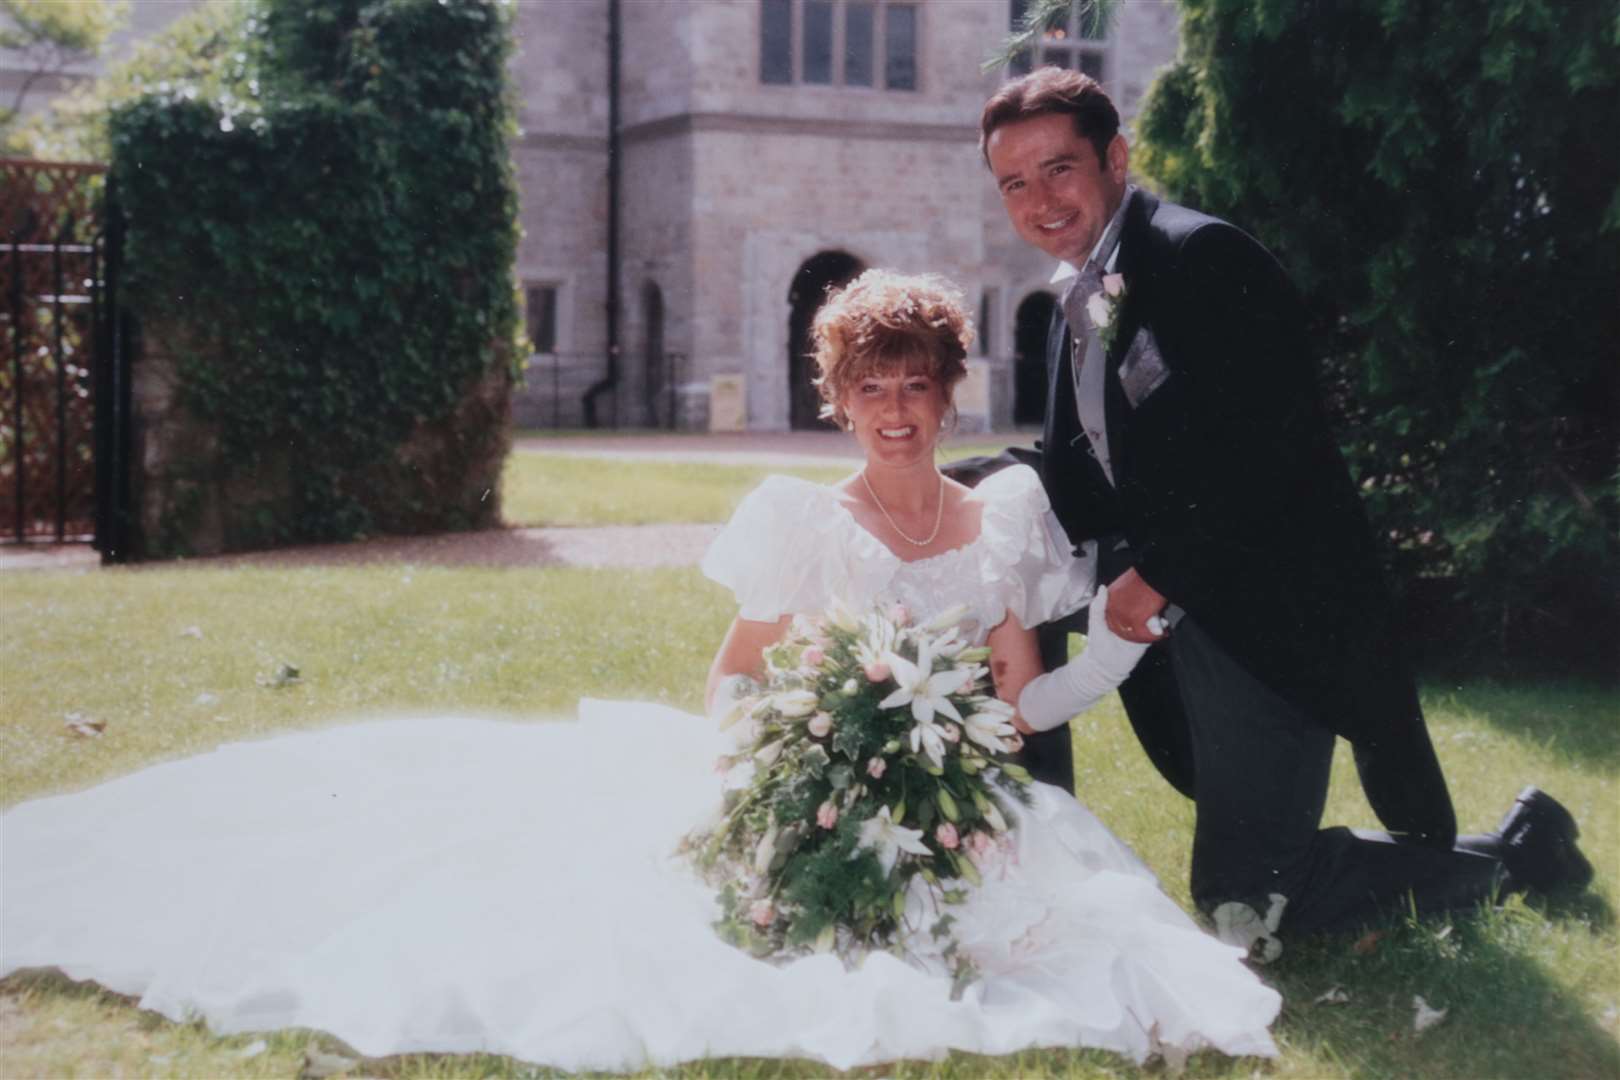 Nicky Clifford and her husband Antony at their wedding on June 26, 1993. Mrs Clifford is wearing her dialysis equipment beneath her wedding gown